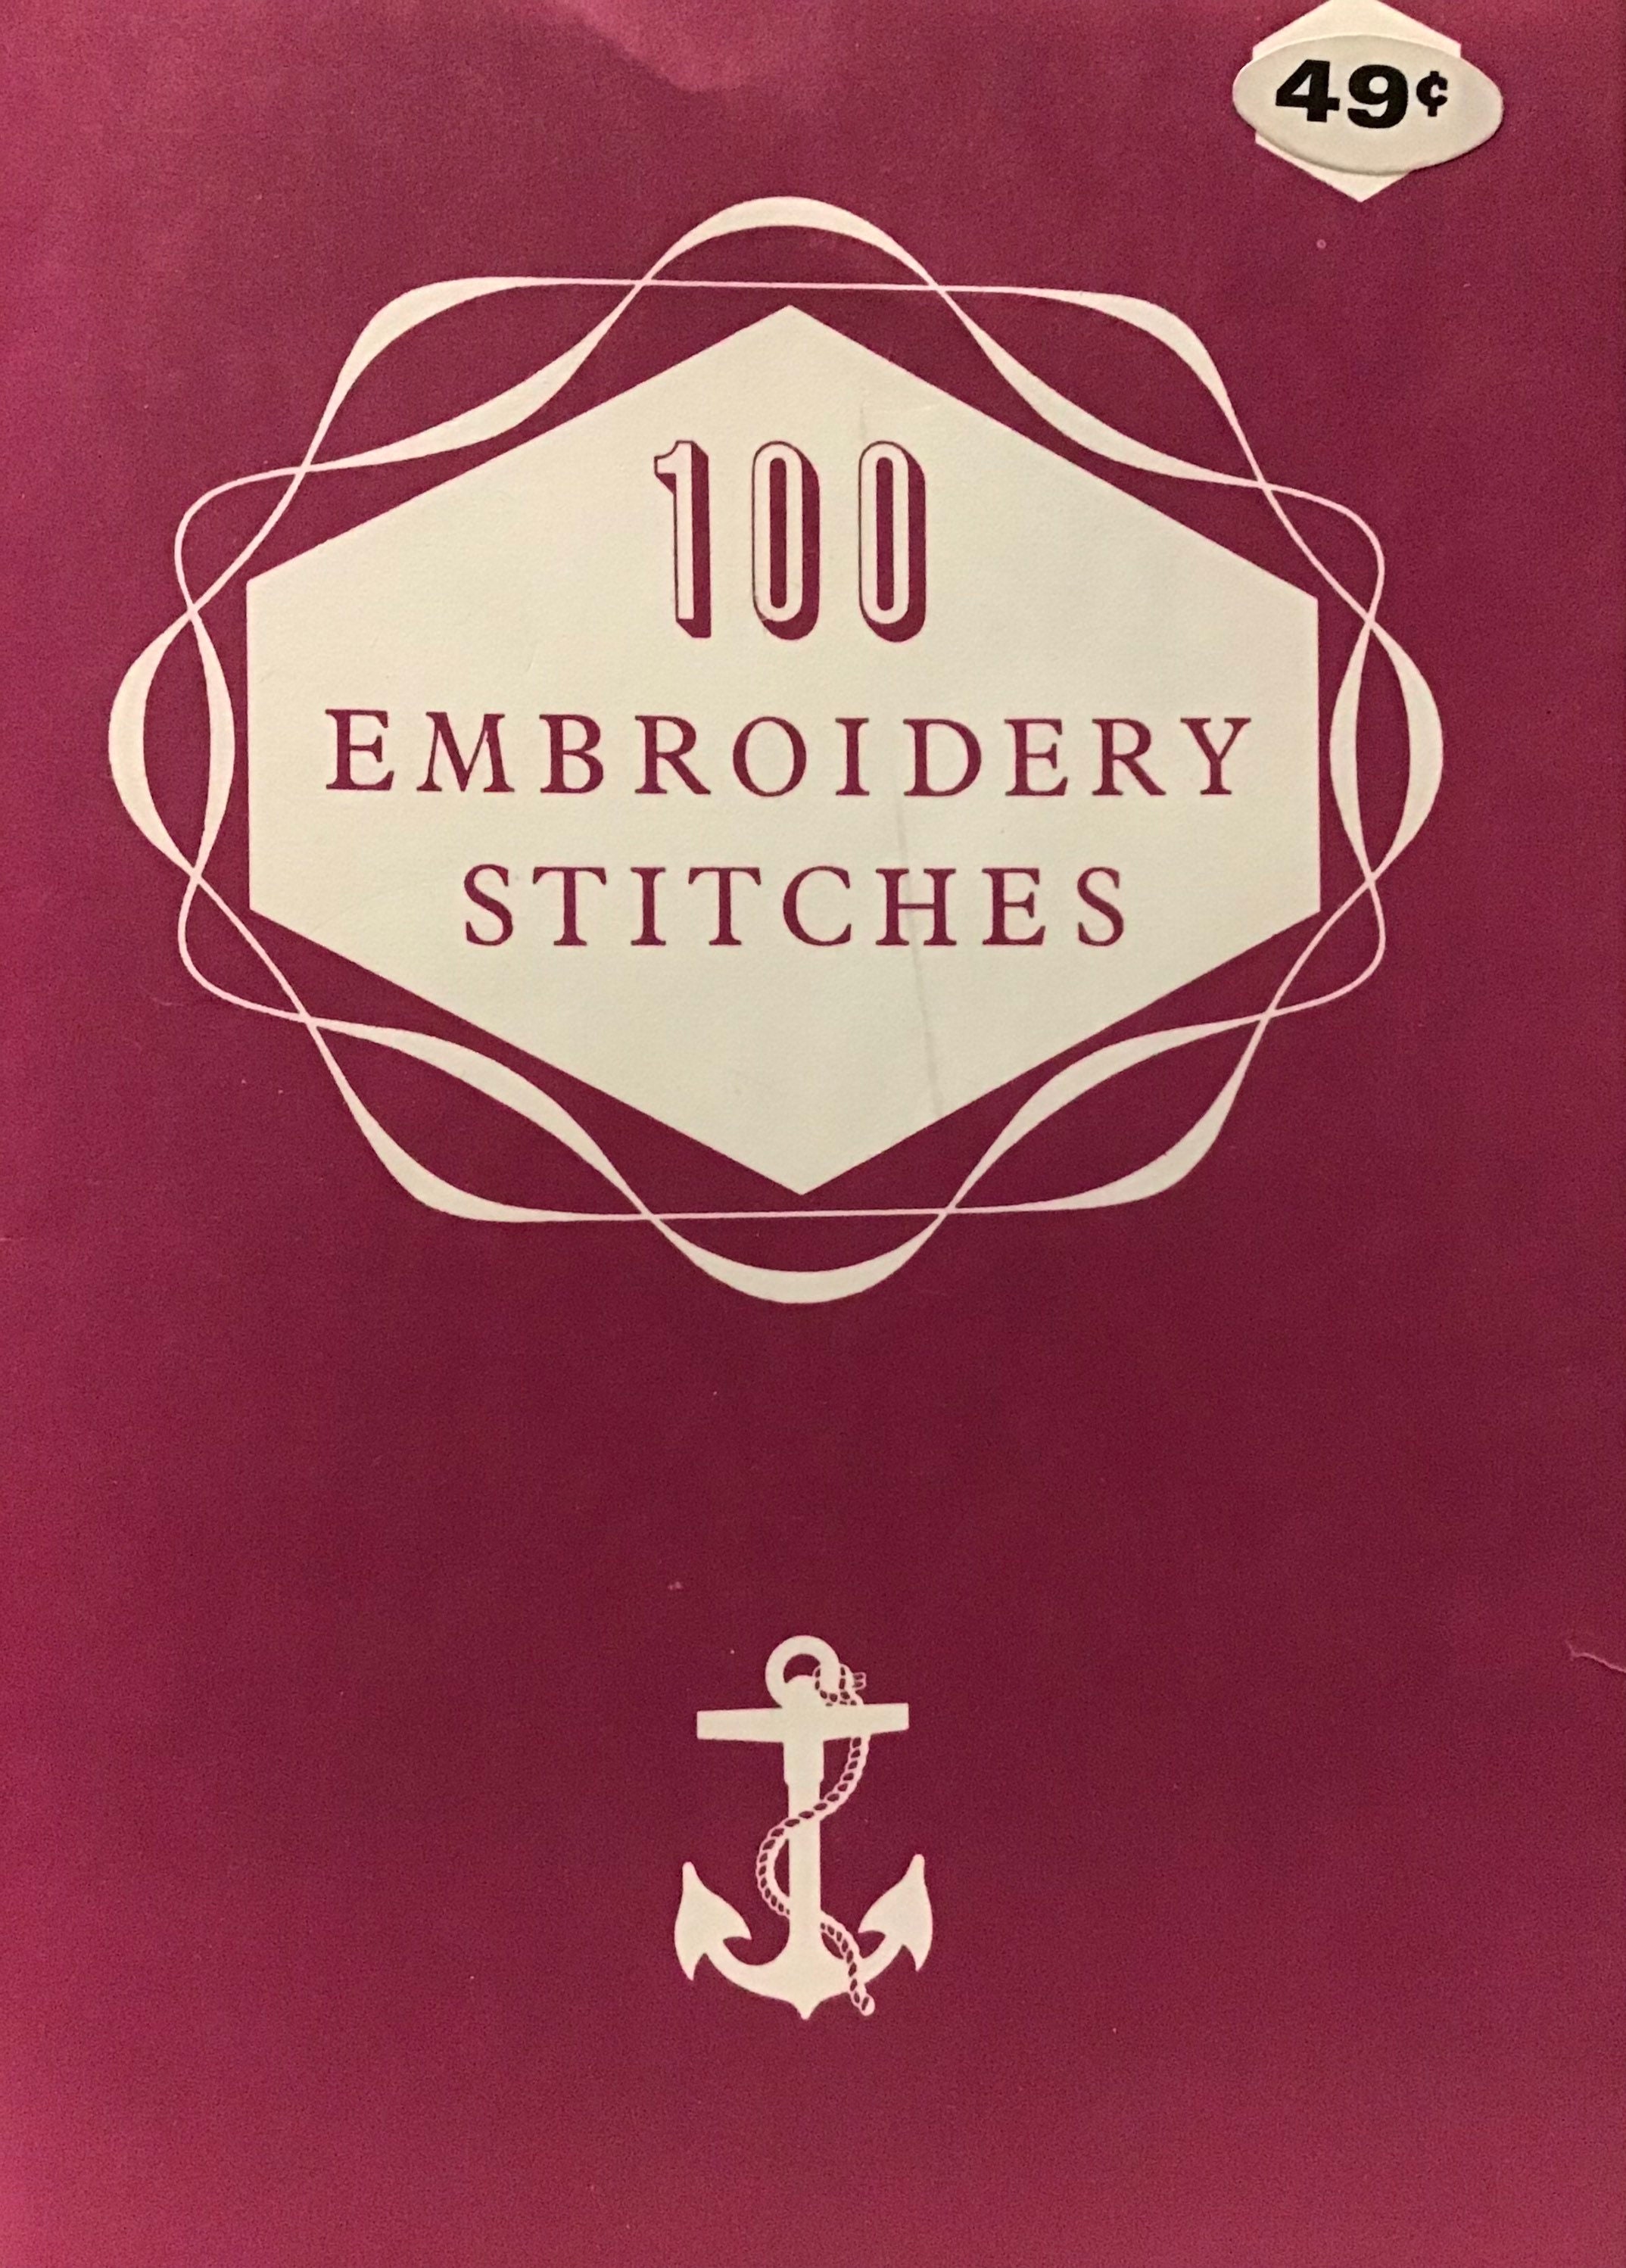 100 Embroidery Stitches BOOK #98 instructions & illustrations